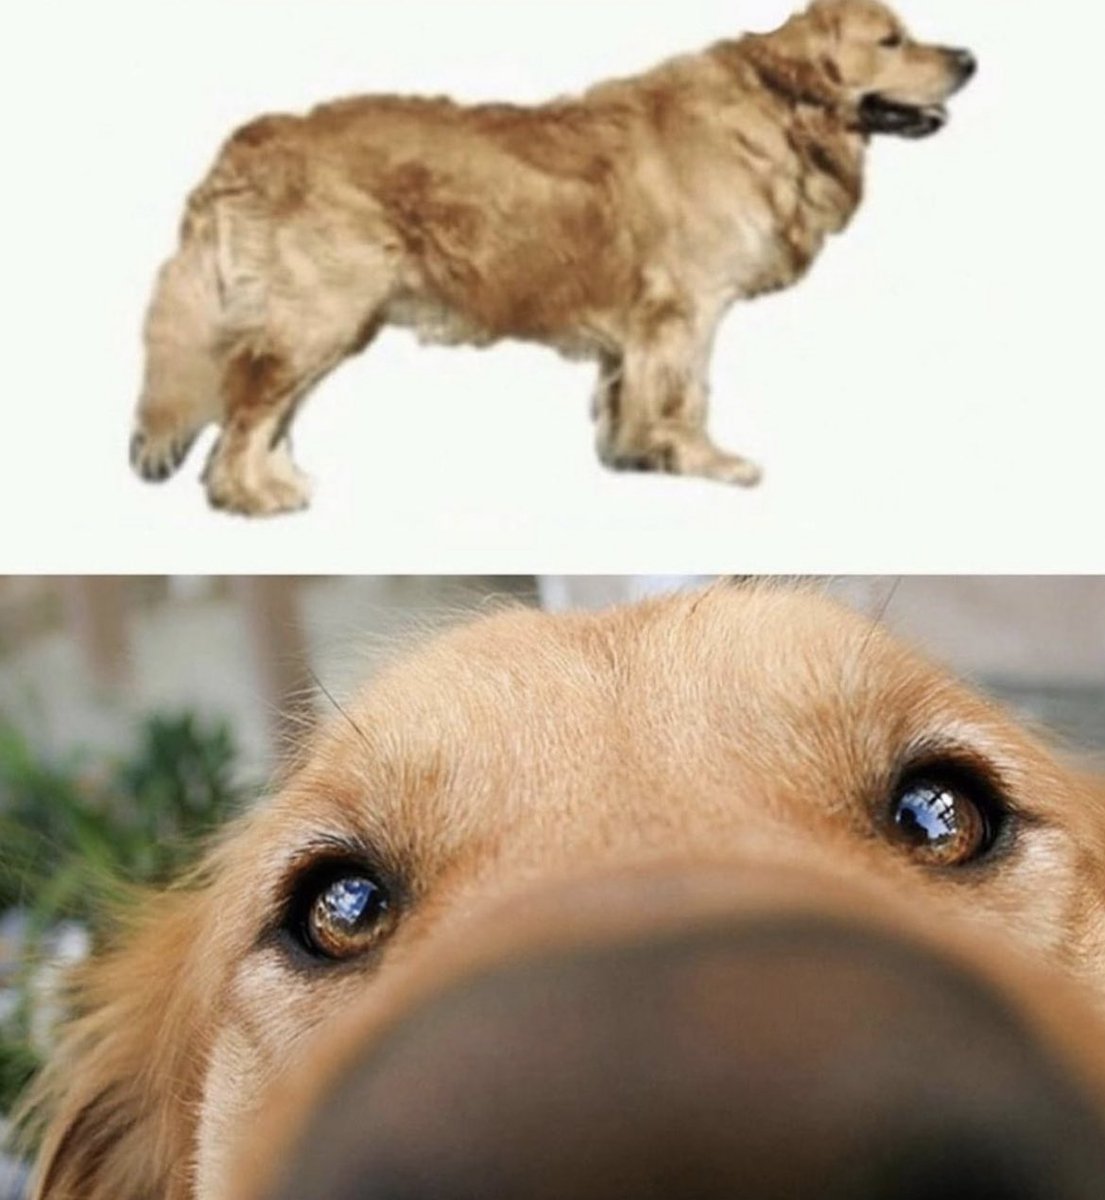 This dog can smell the person who farted